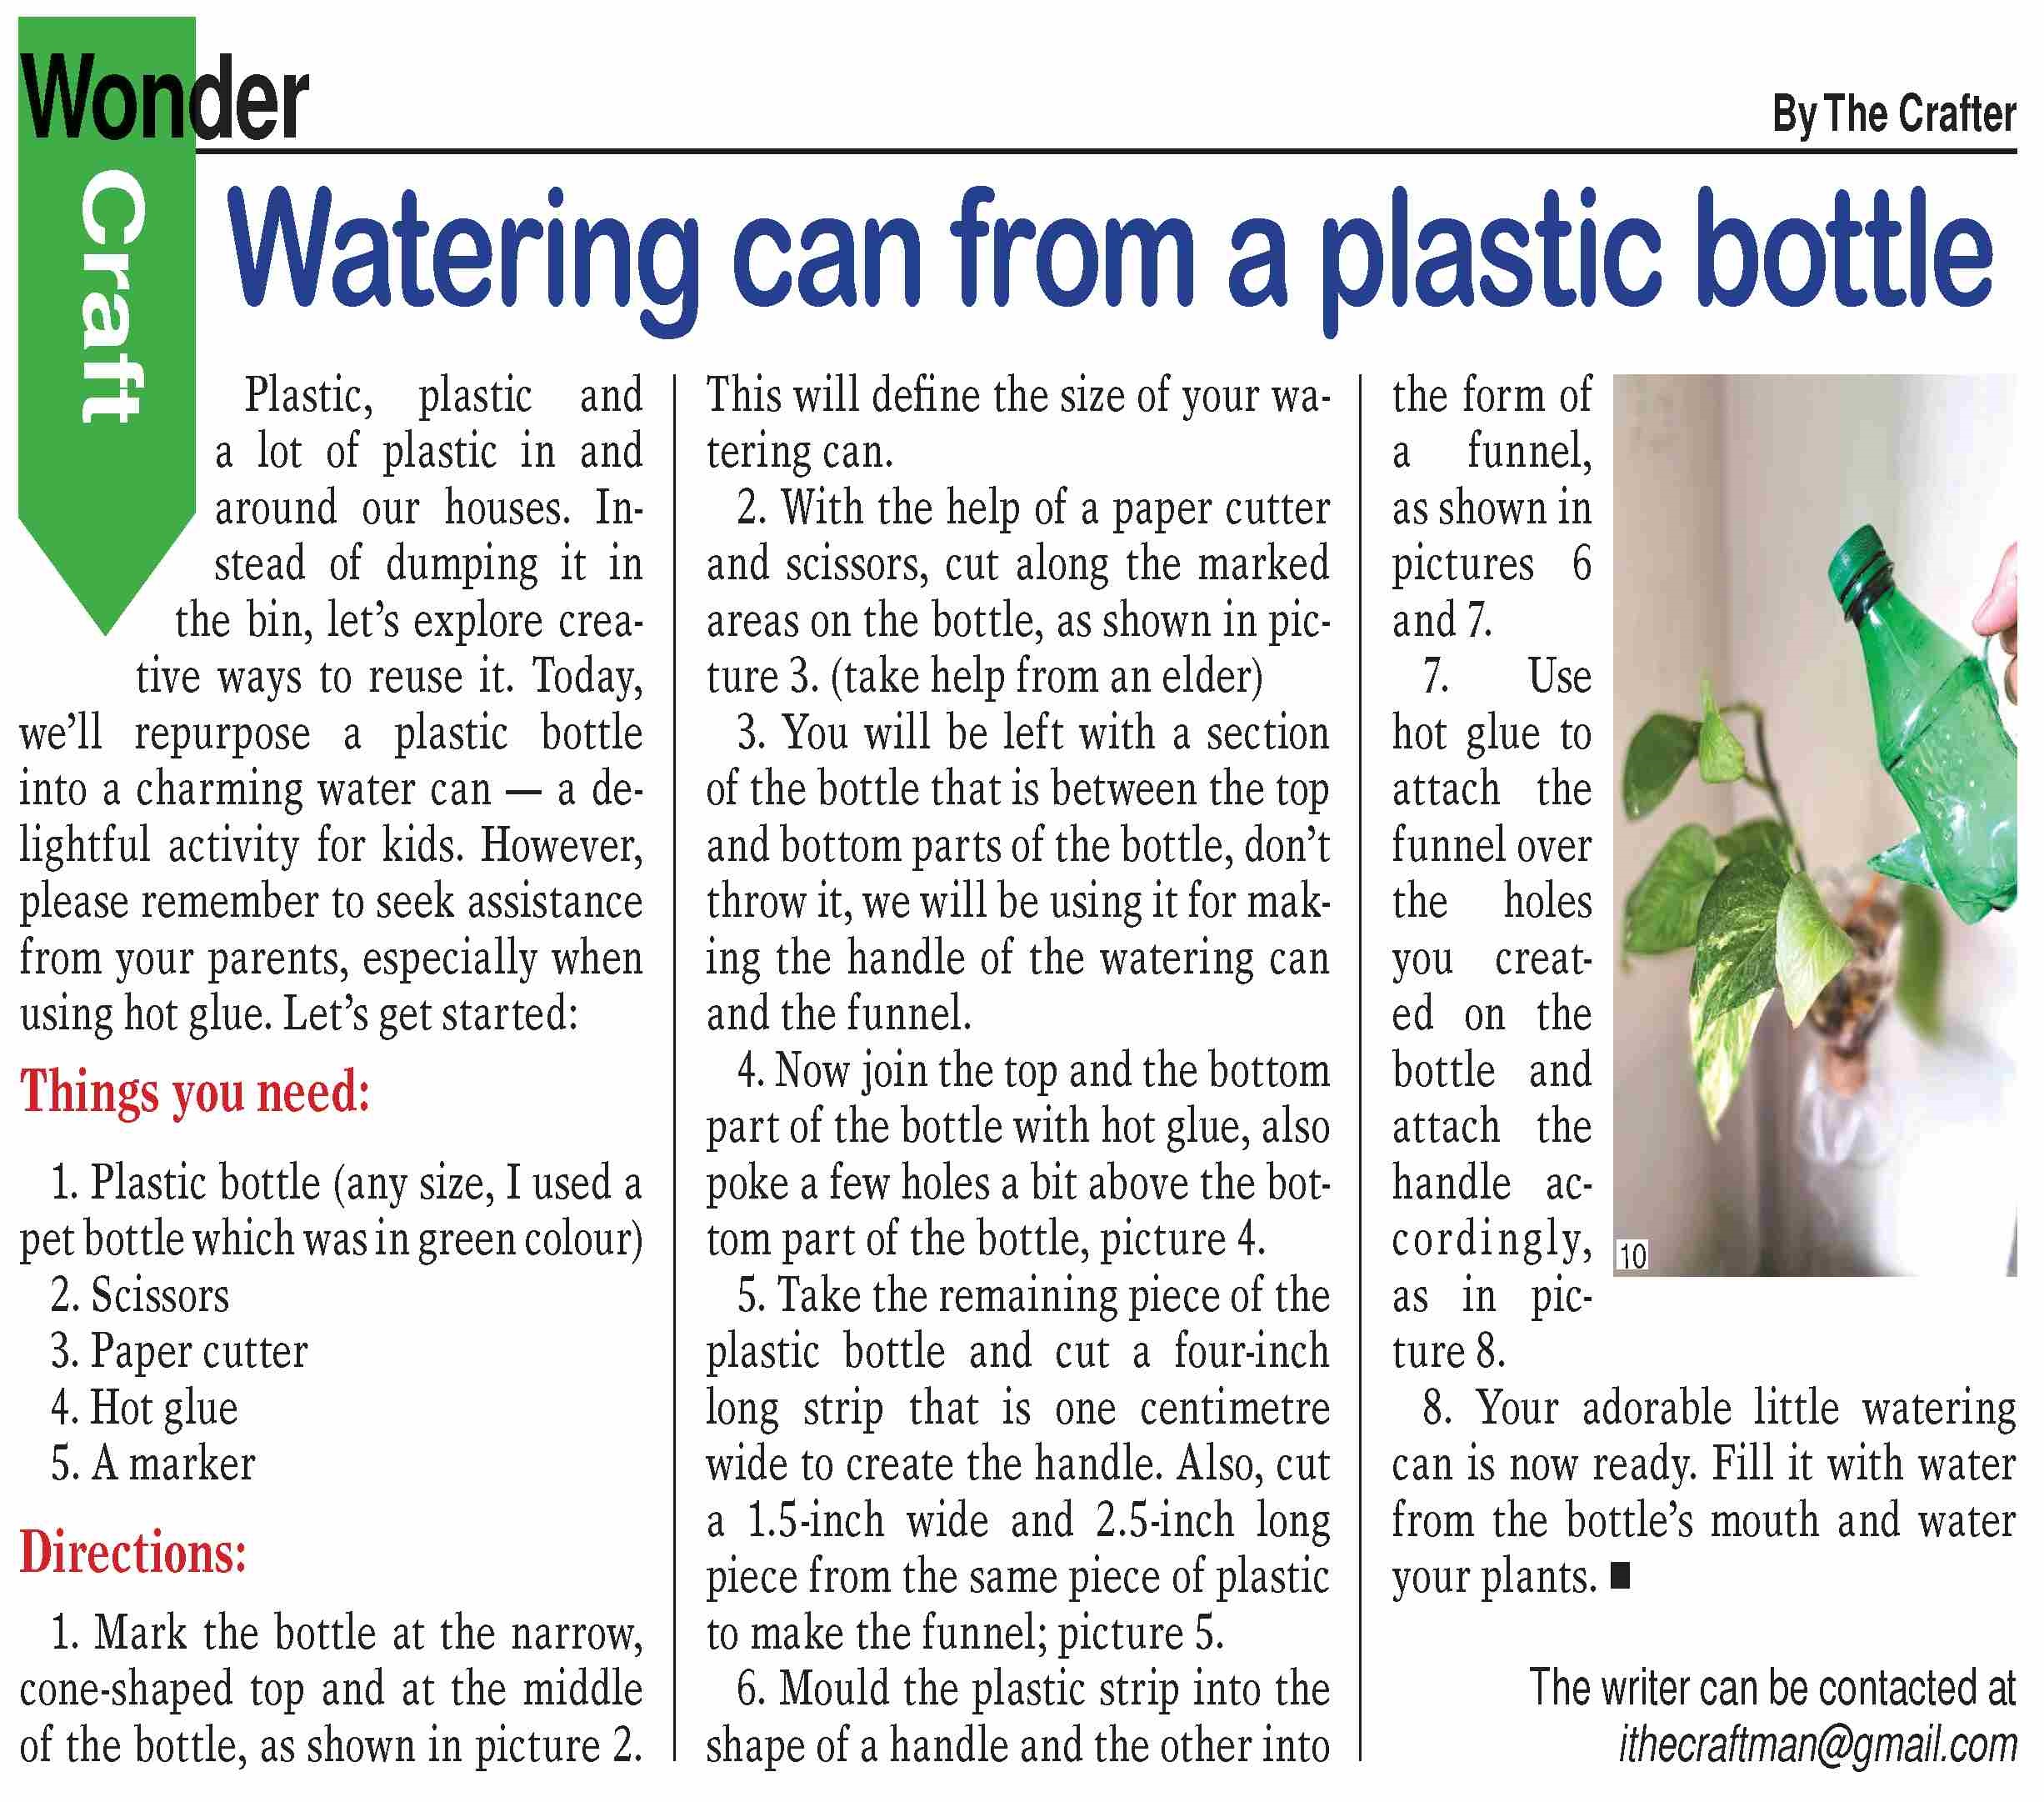 How to do it - Watering can from a plastic bottle in detail